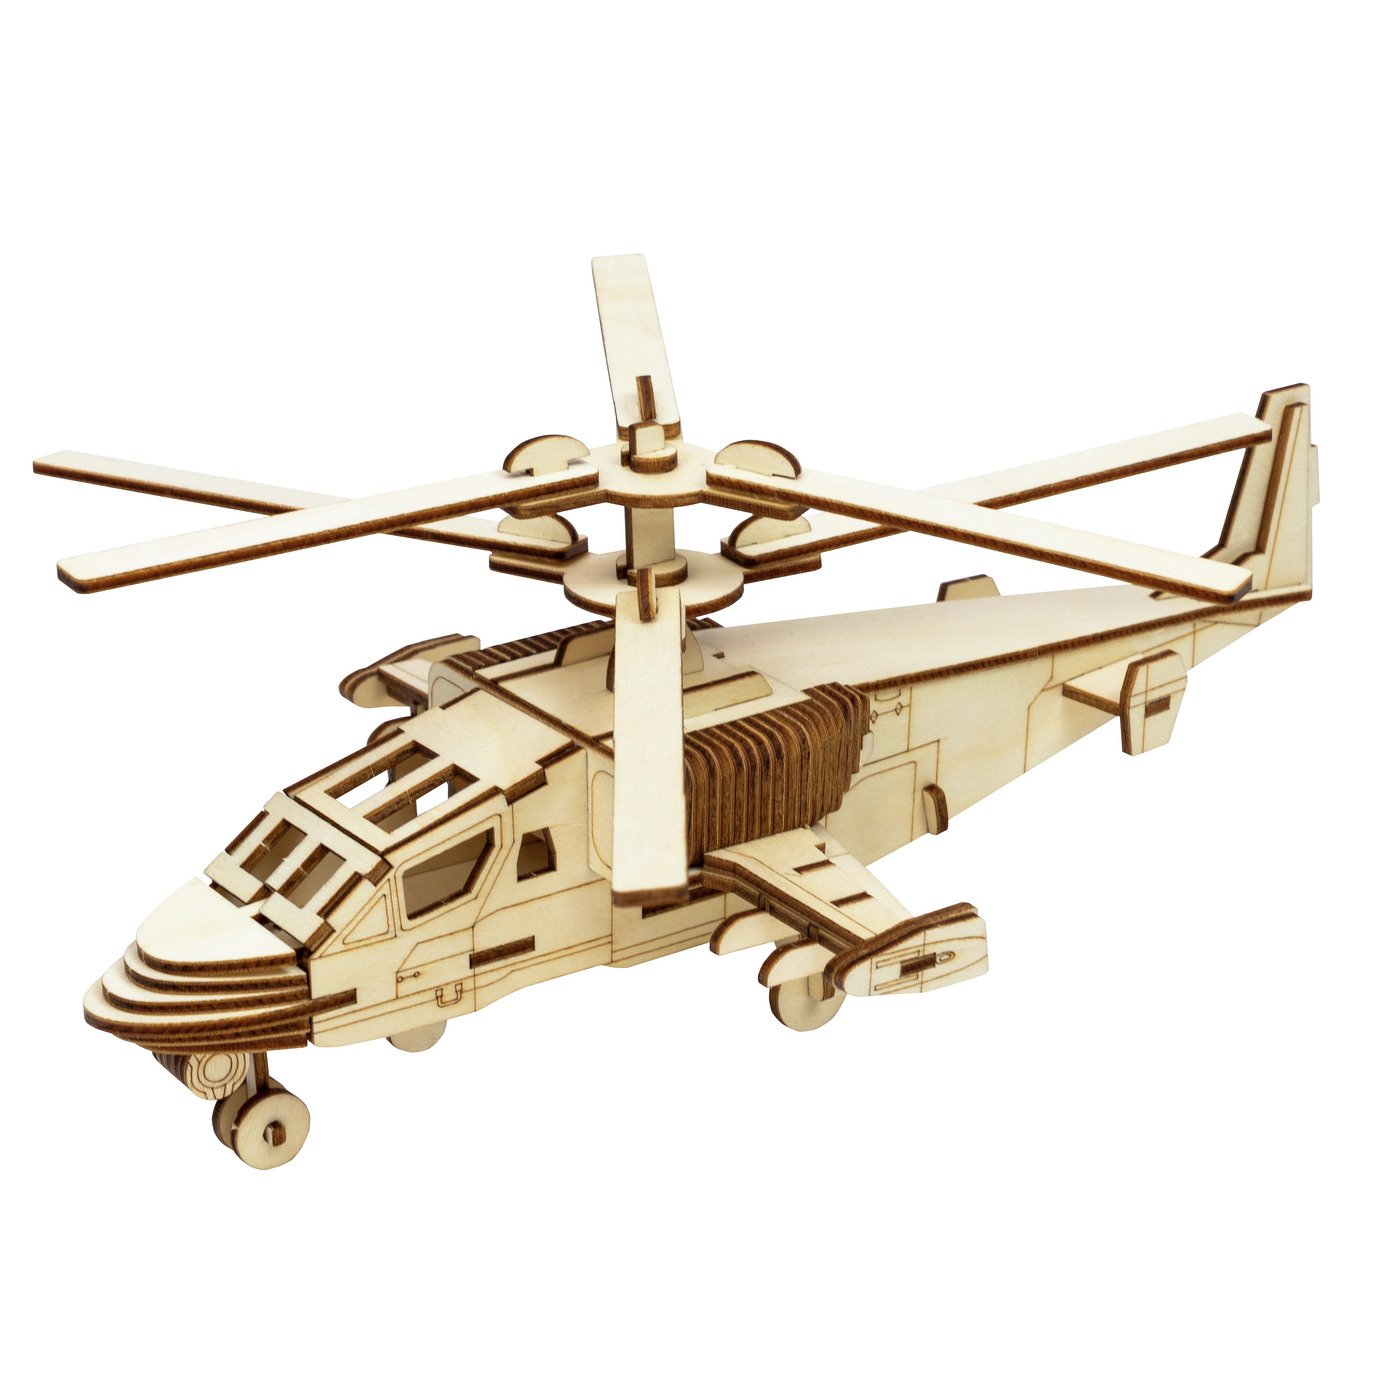 Helicopter Construction Kit Review